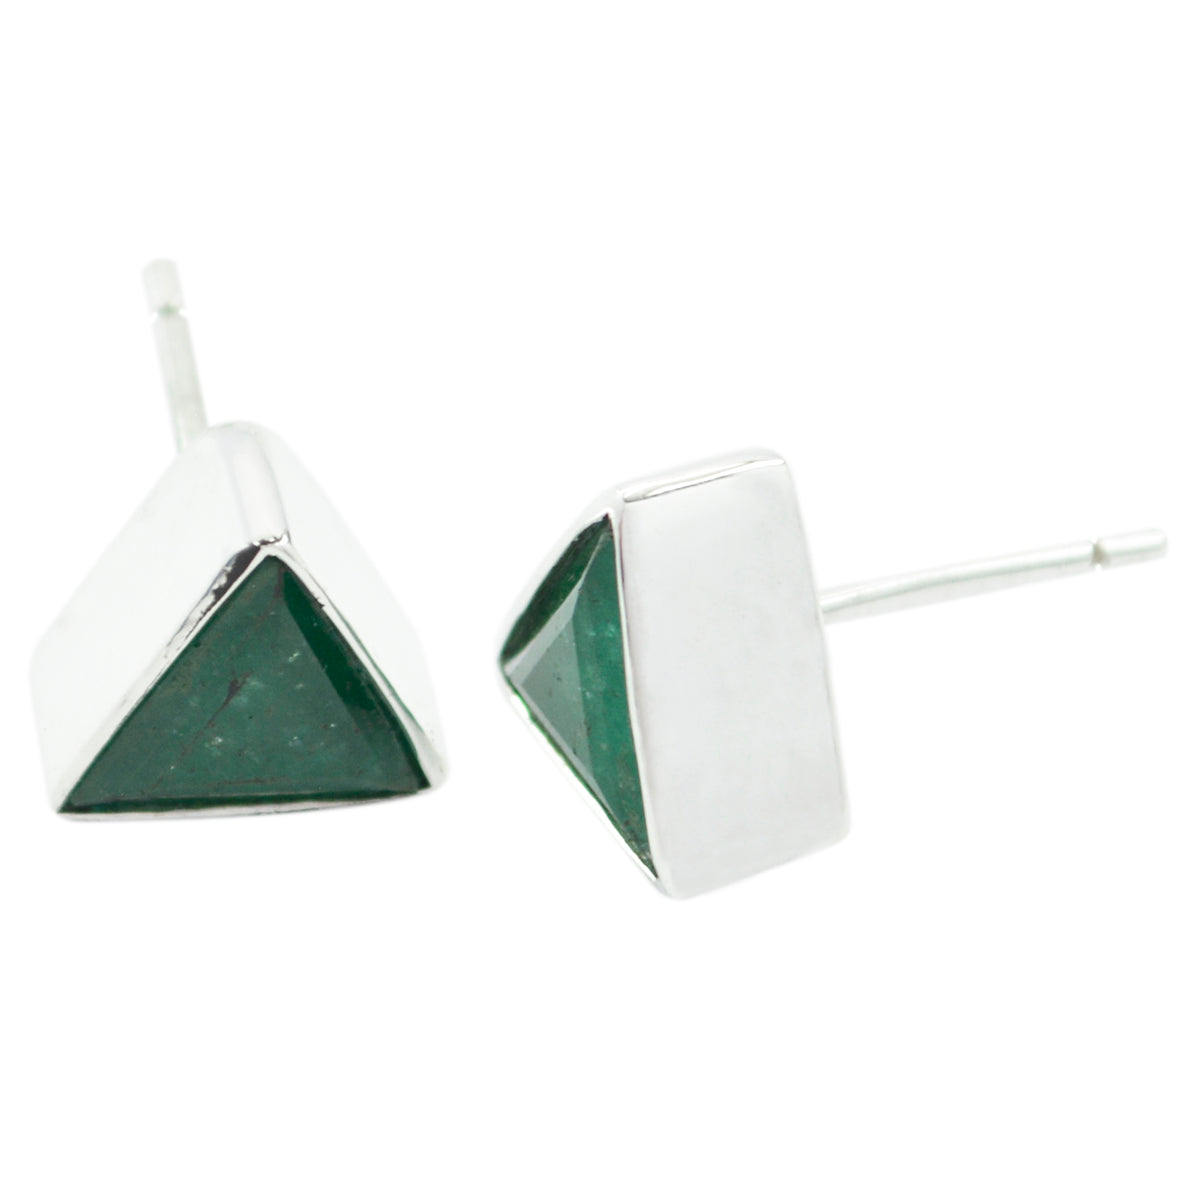 Riyo Genuine Gems triangle Faceted Green Indian Emerald Silver Earrings gift for women